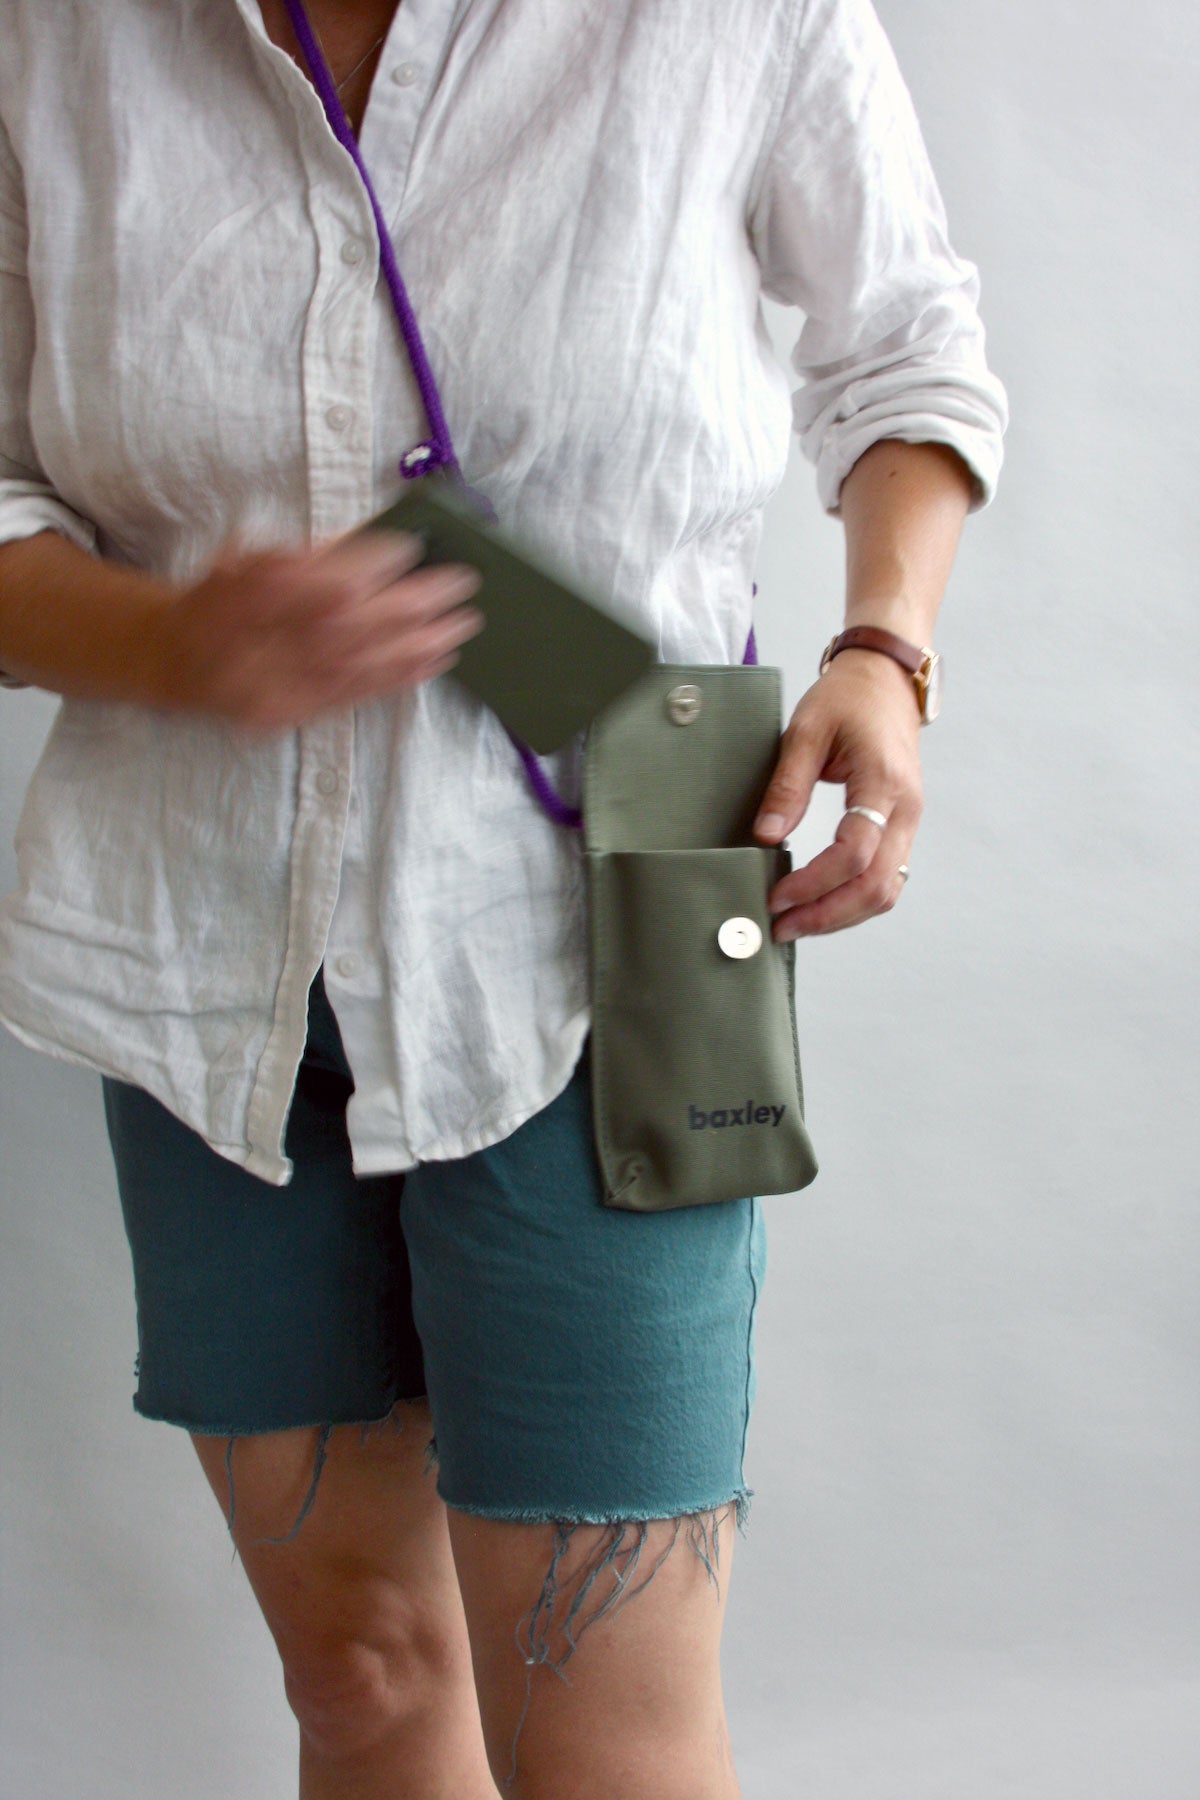 The female model is placing her phone into Pip the pocket. The bag is shown with flap open, with a magnet closure visible.